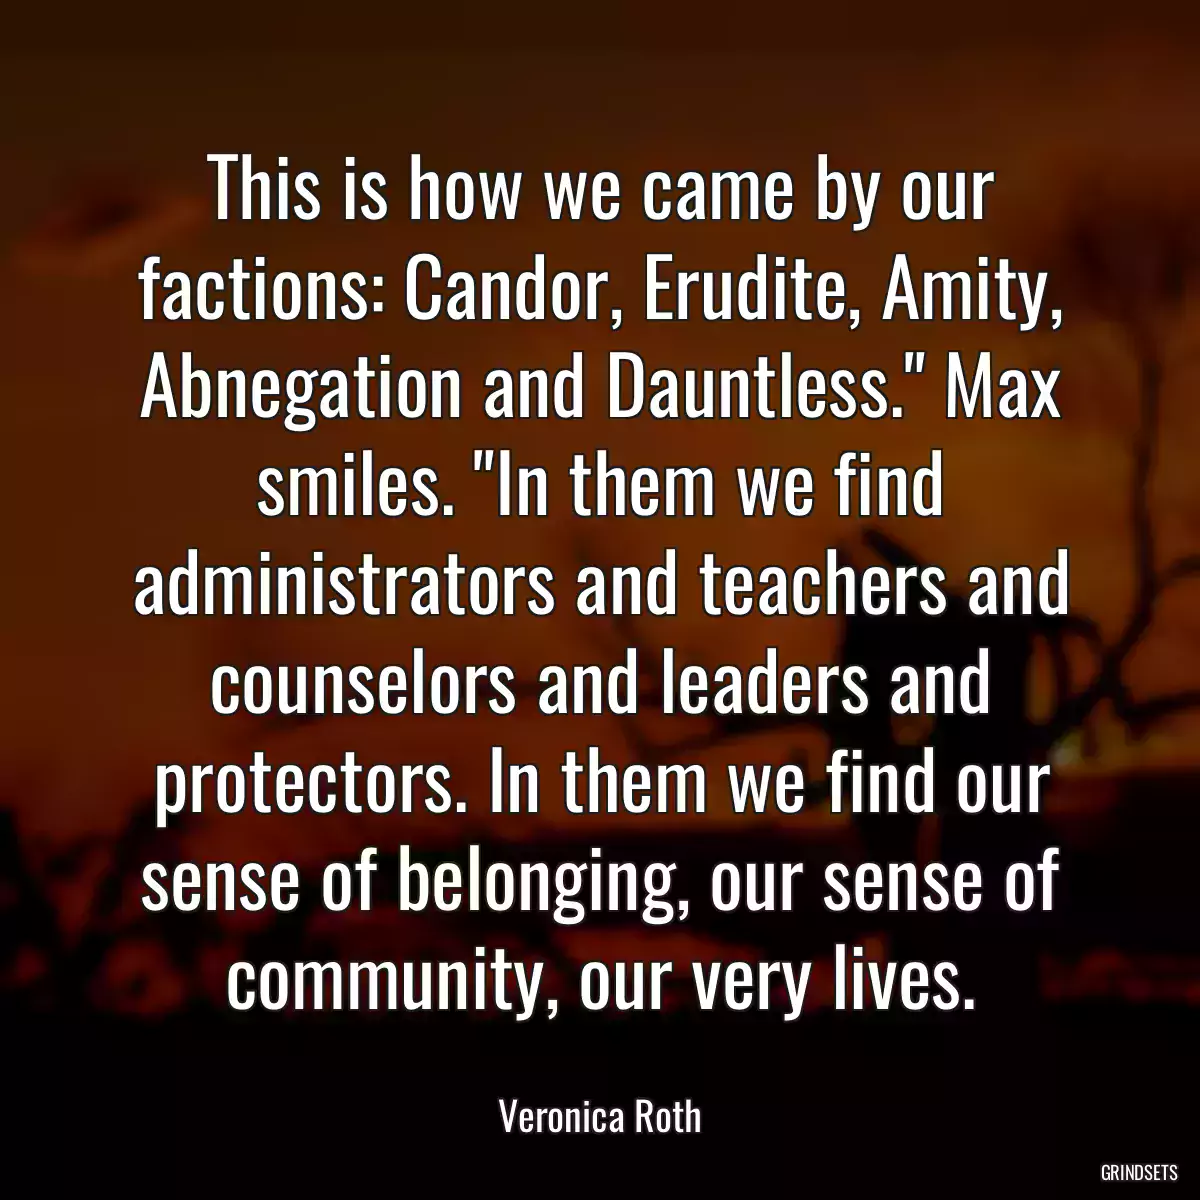 This is how we came by our factions: Candor, Erudite, Amity, Abnegation and Dauntless.\